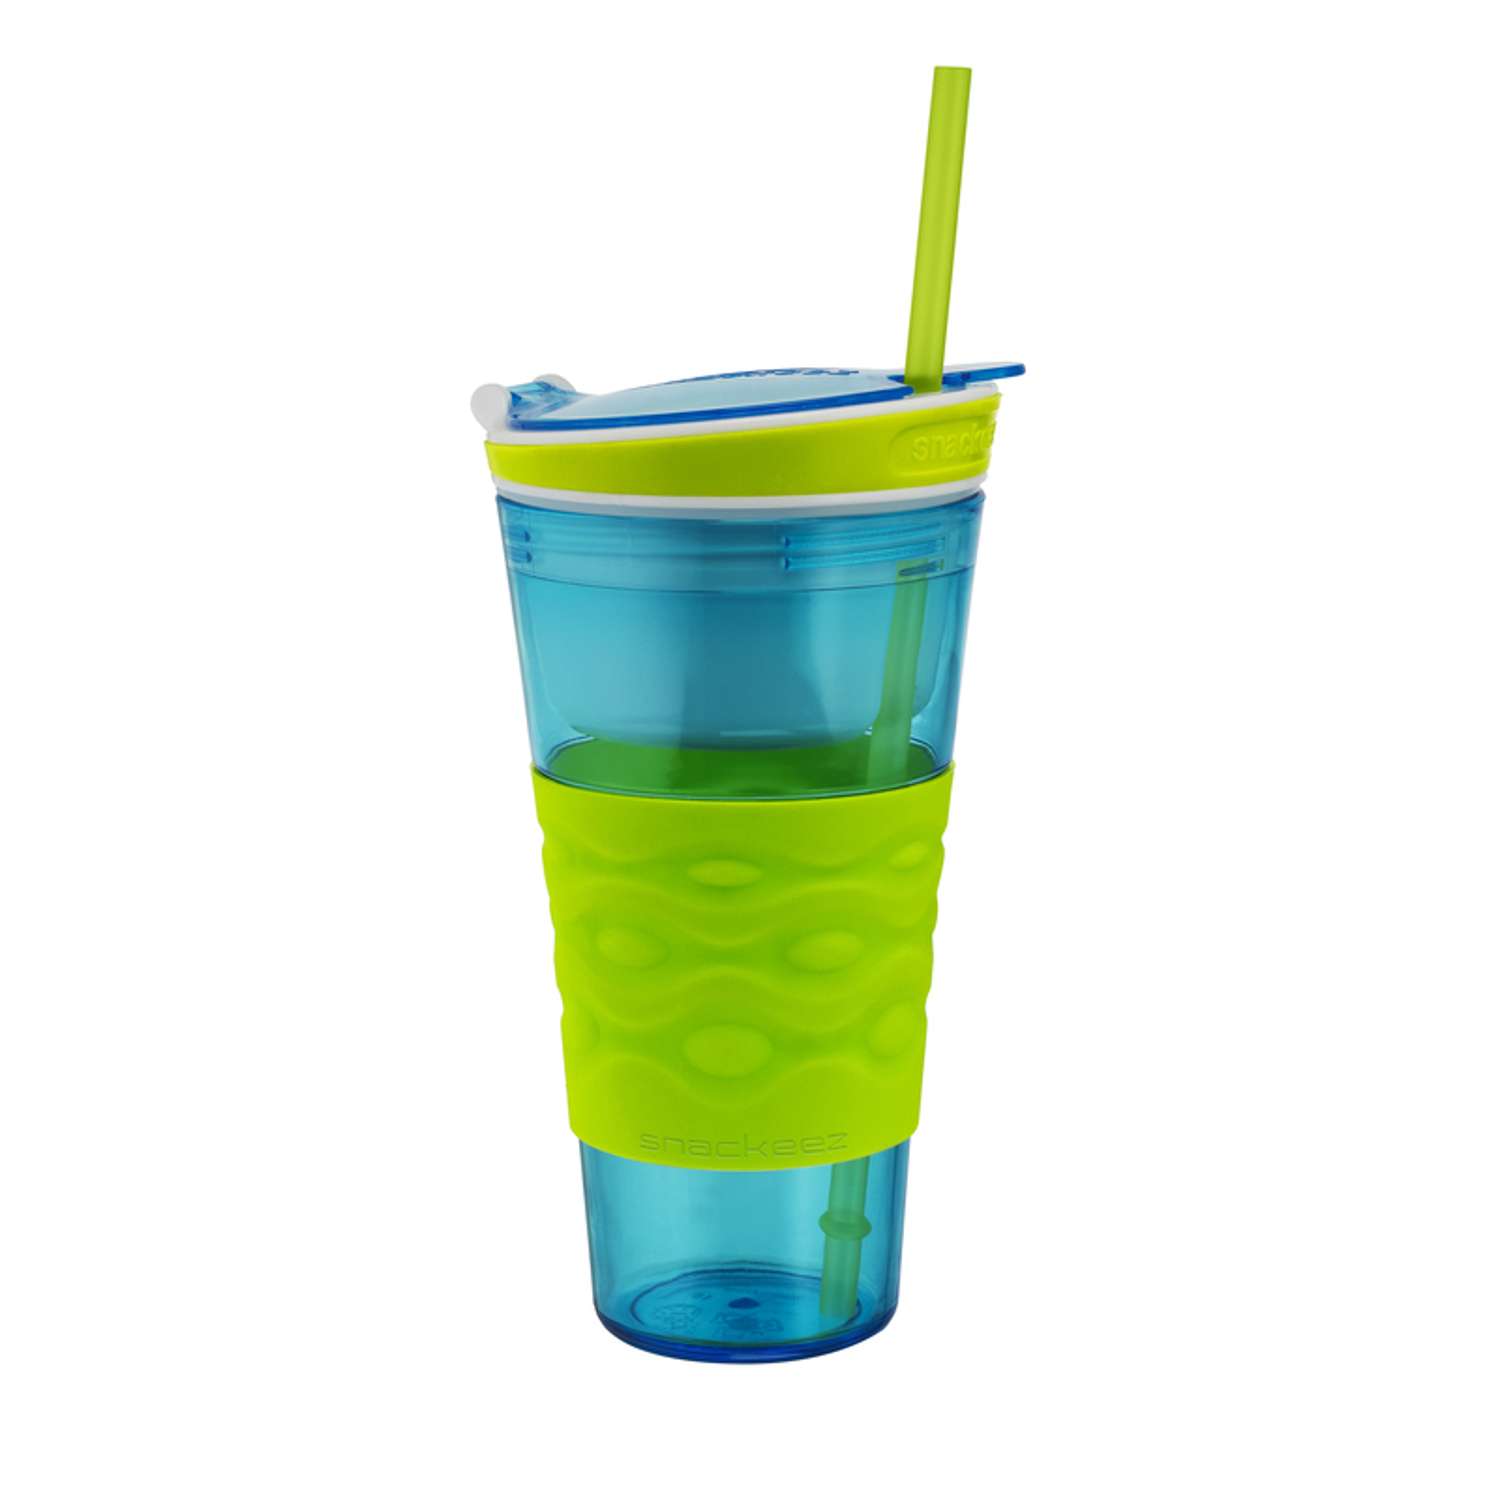 Snackeez Plastic 2 in 1 Snack & Drink Cup One Cup Assorted Colors